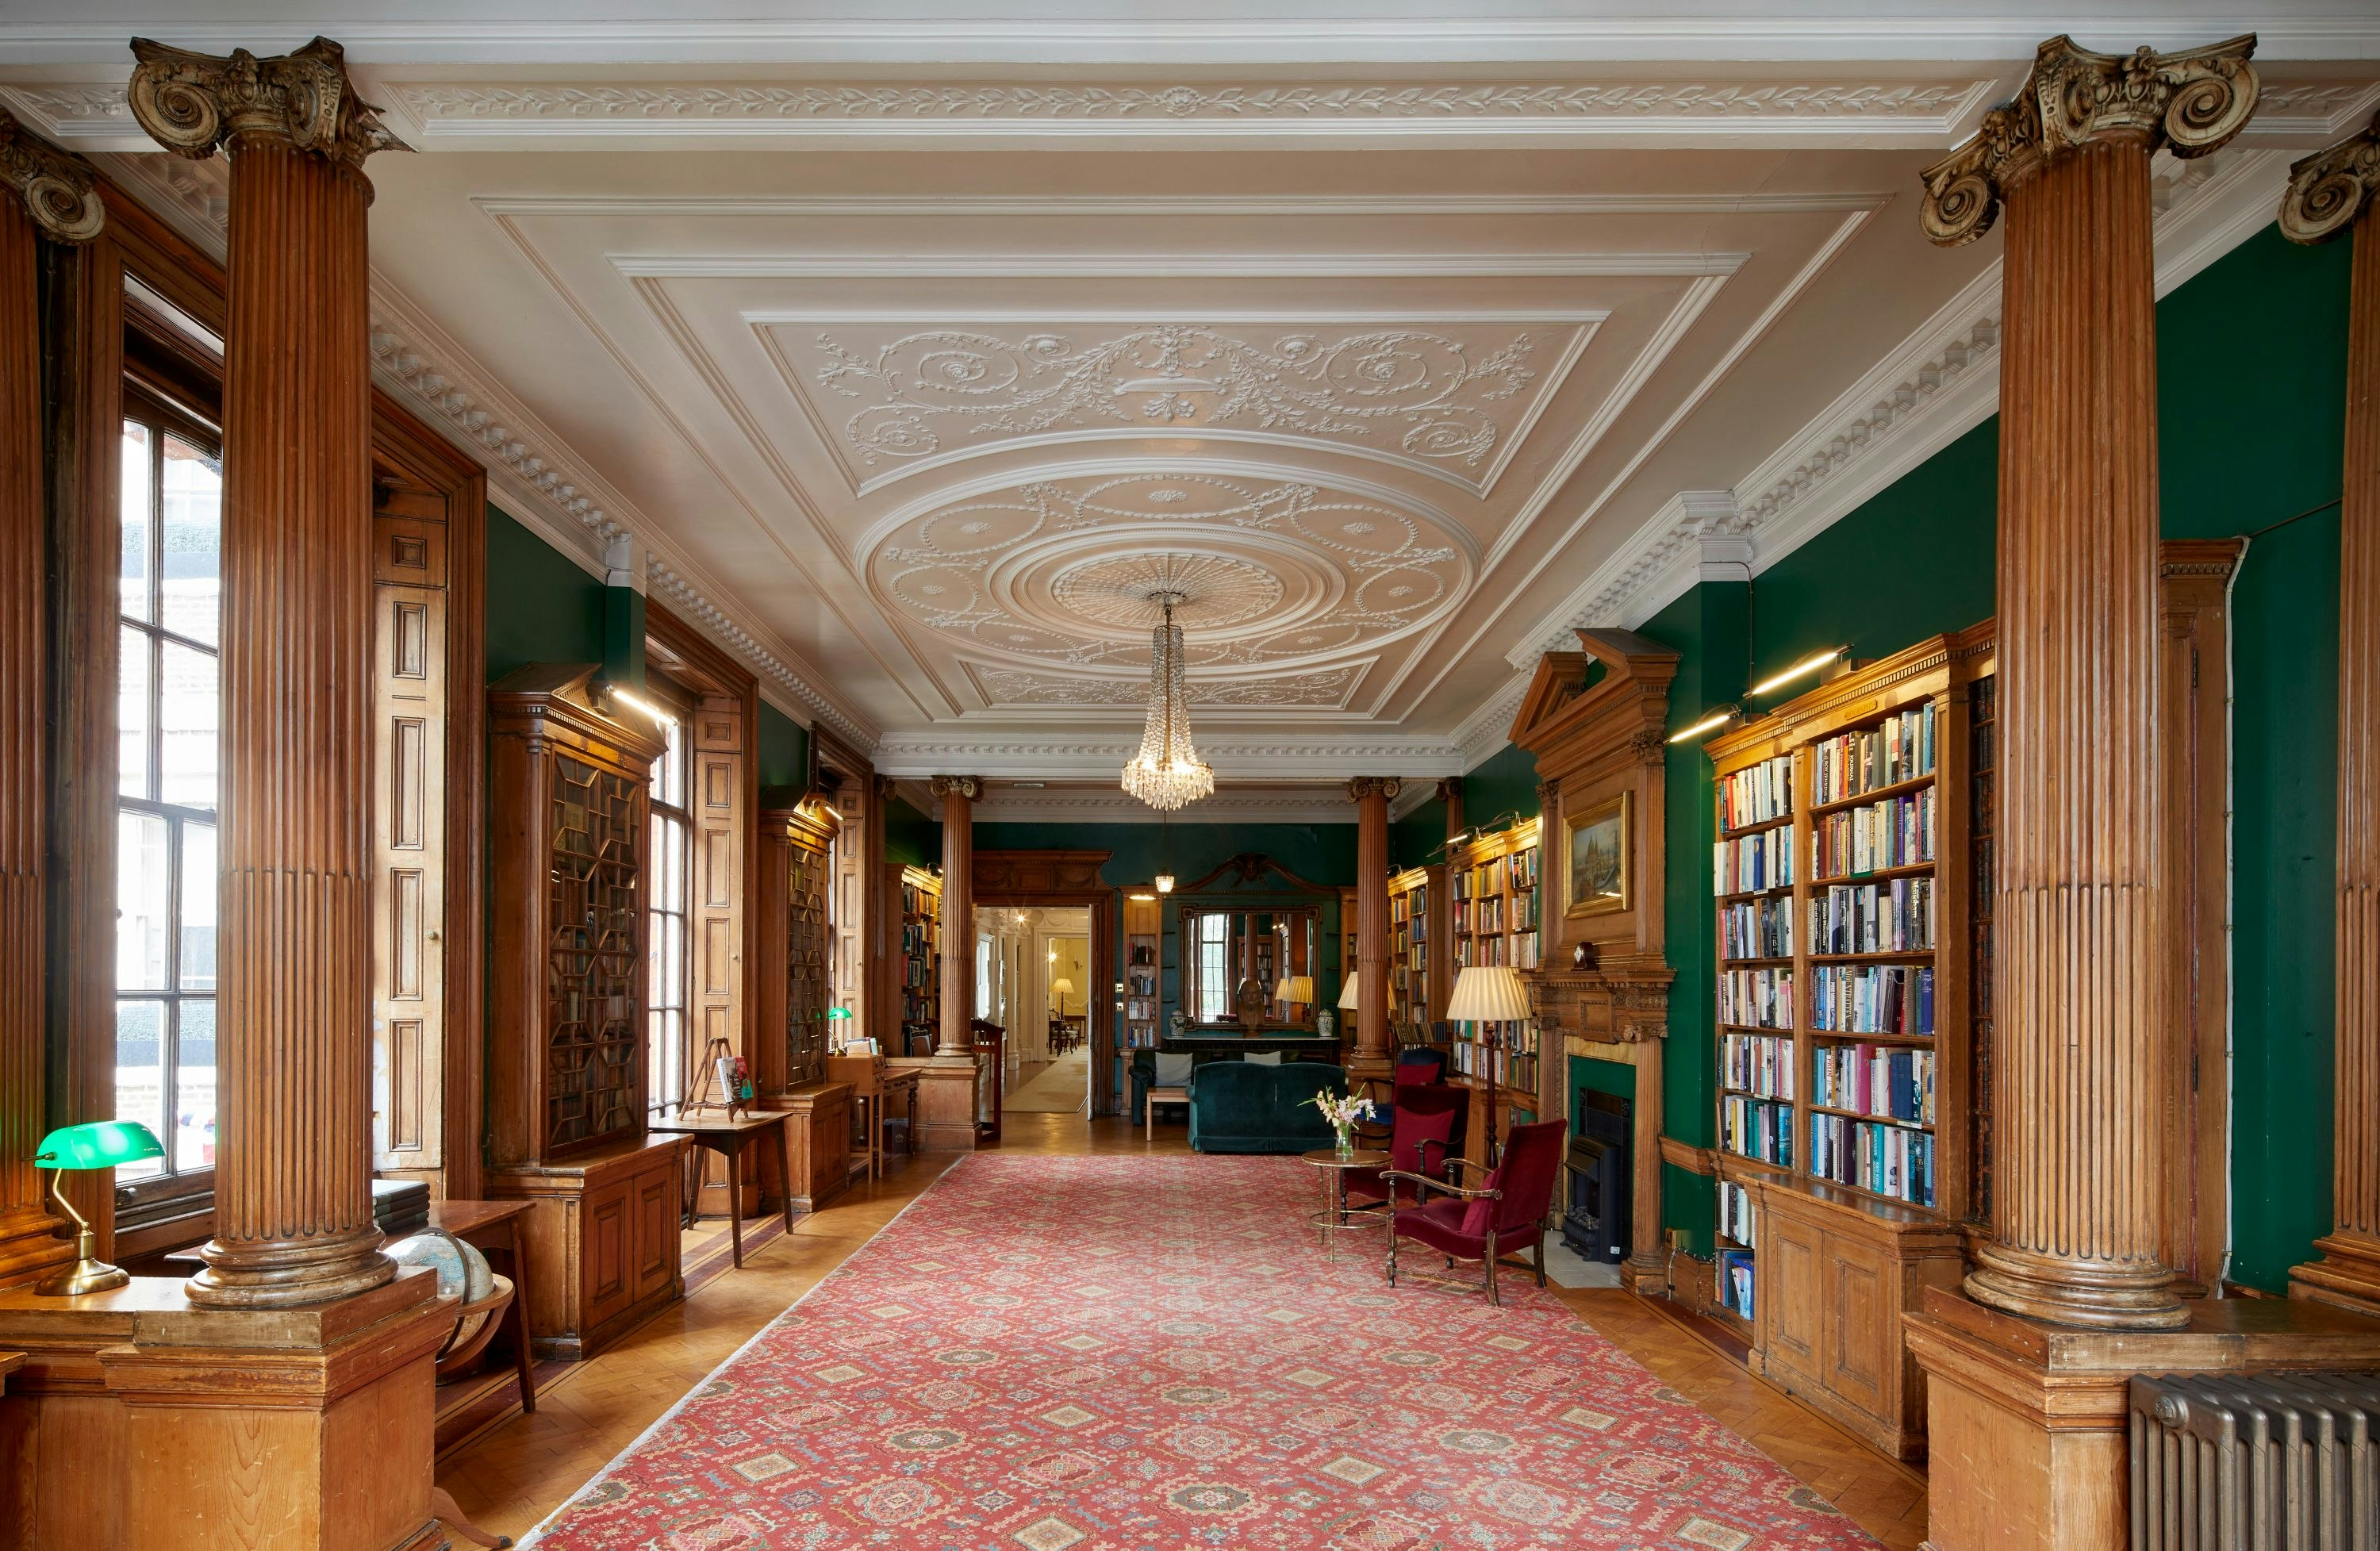 University Women's Club - The Library image 3